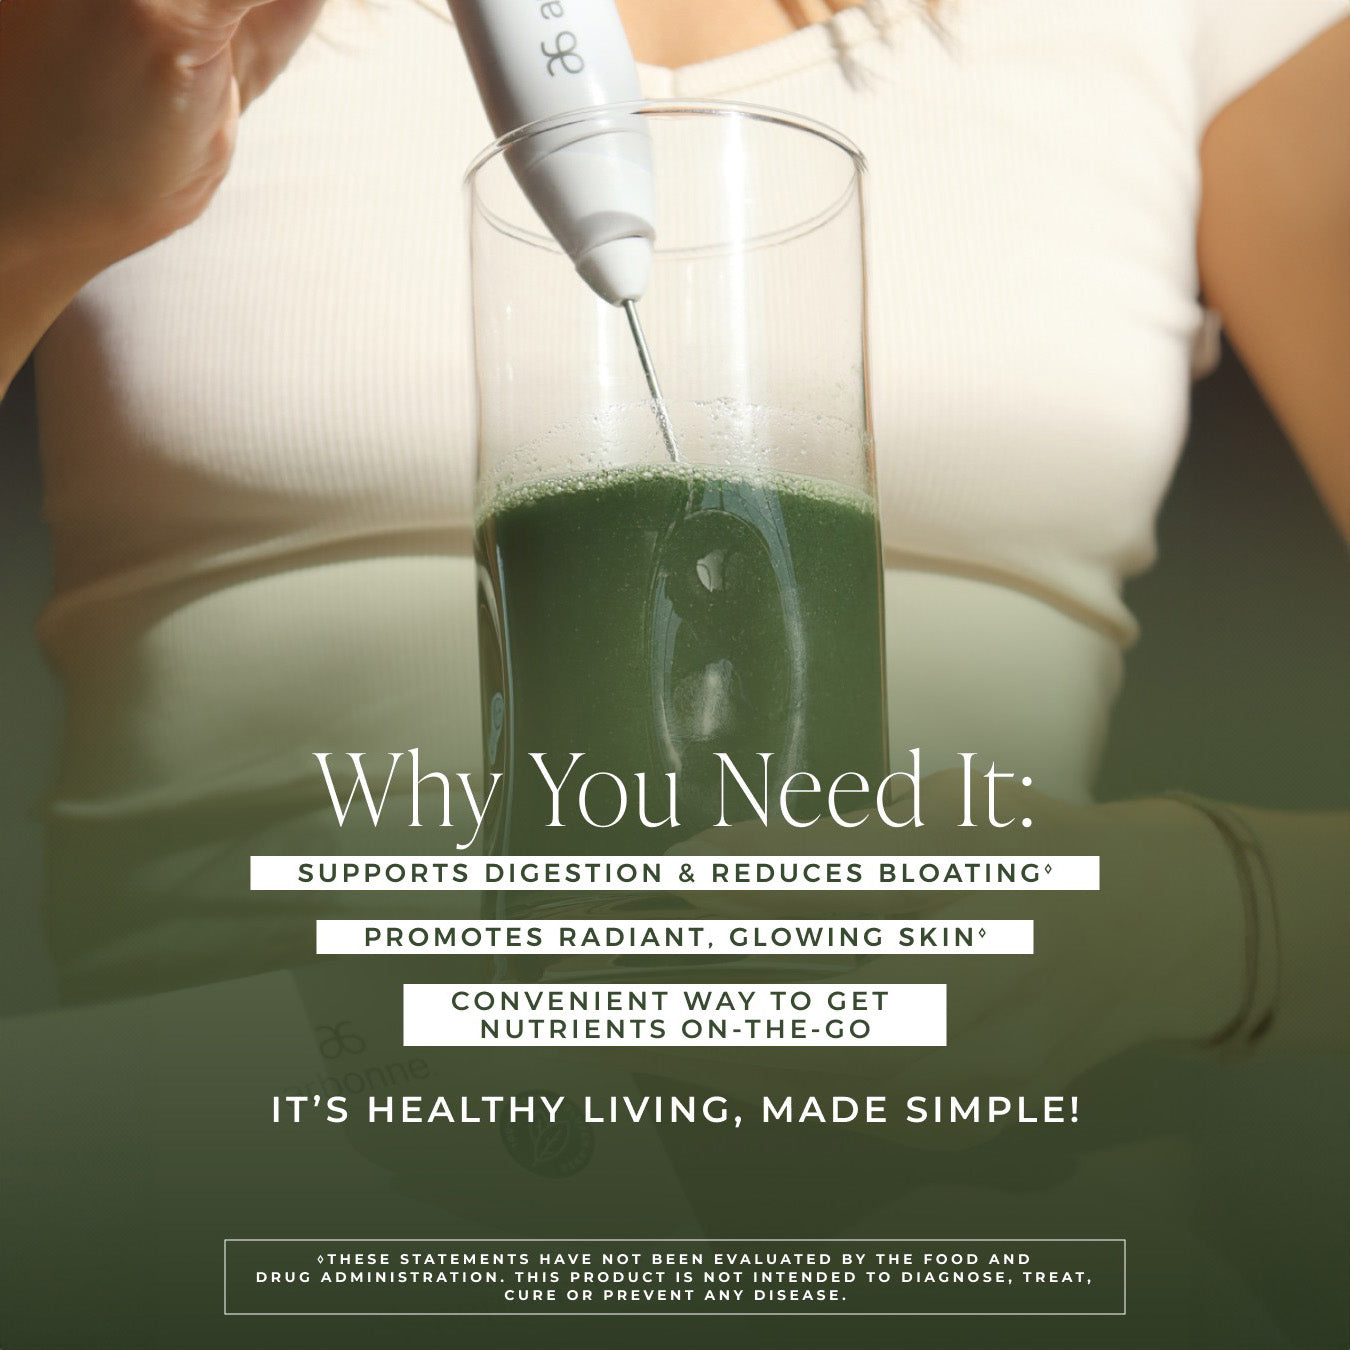 Woman mixing Arbonne GreenSynergy Elixir in a glass with a handheld mixer, with text highlighting the benefits: supports digestion, reduces bloating, promotes radiant skin, and provides nutrients on-the-go.